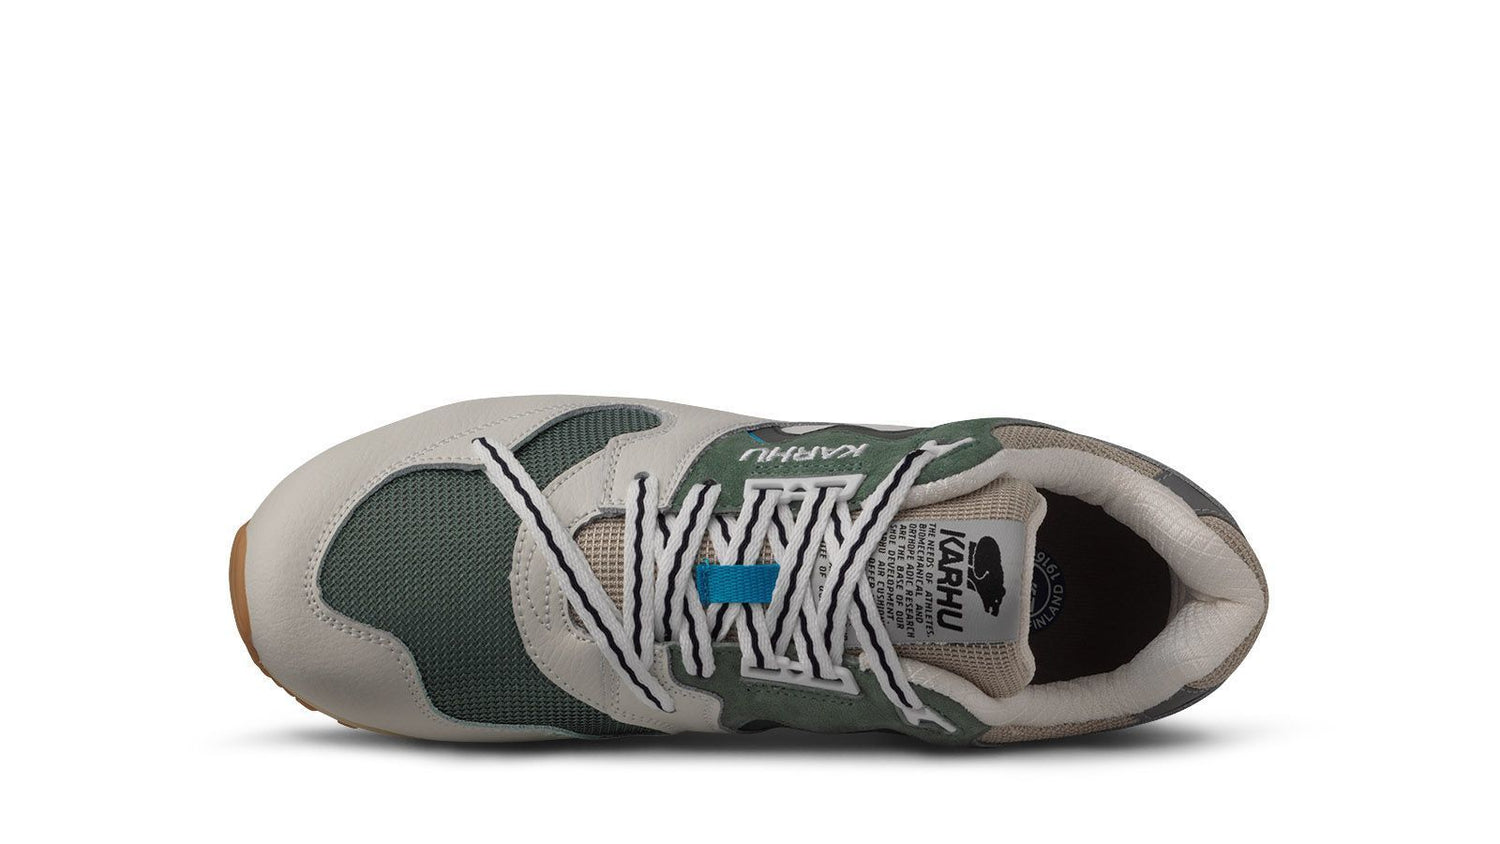 karhu synchron classic lily white forest green